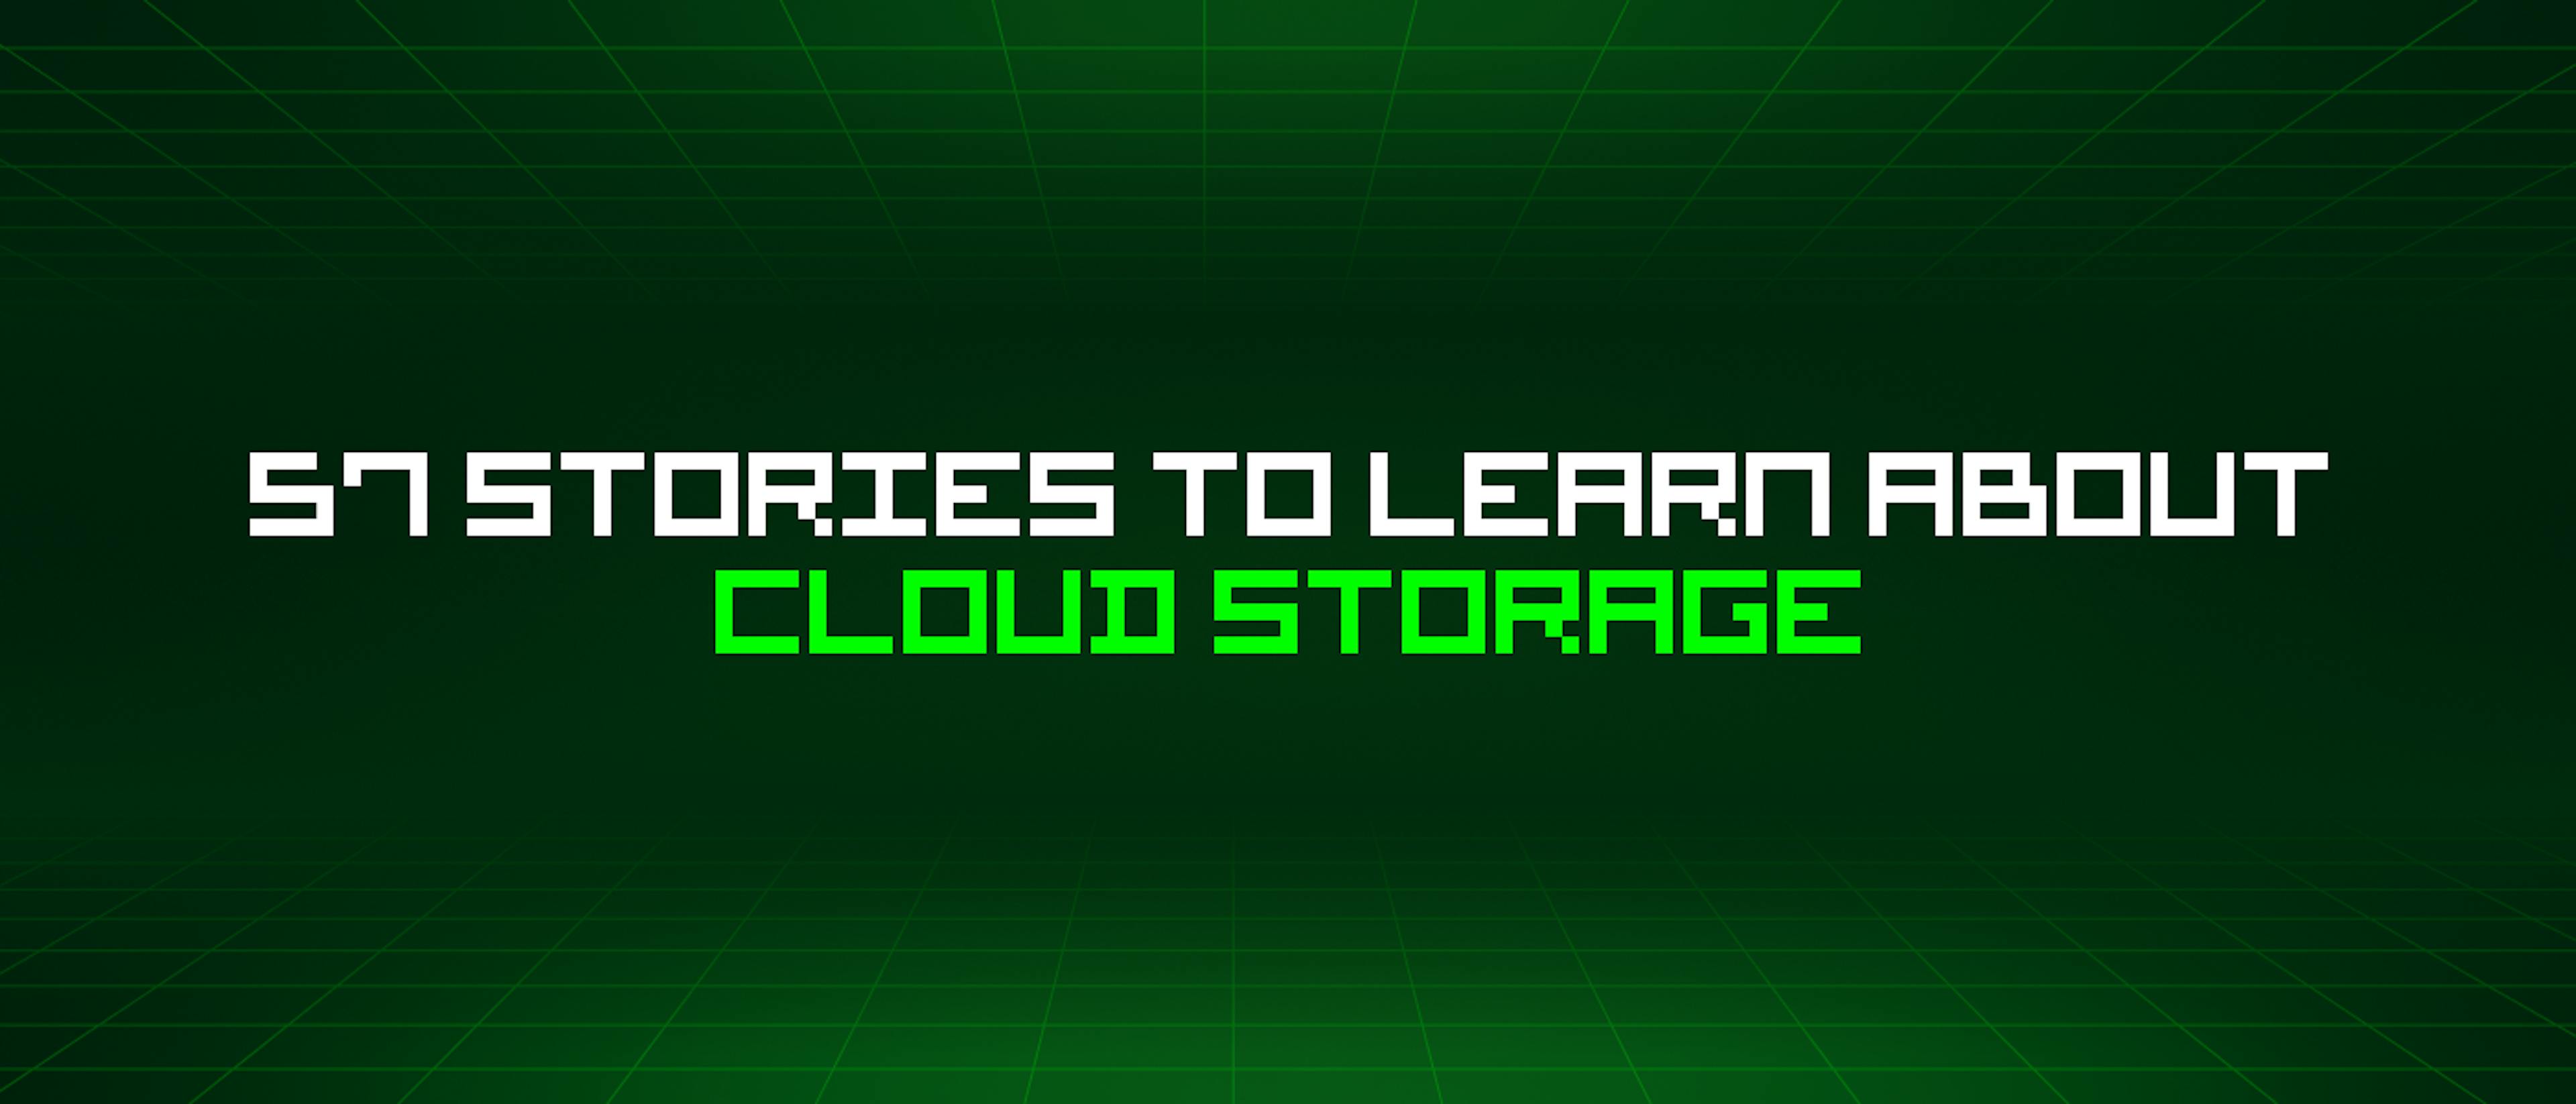 featured image - 57 Stories To Learn About Cloud Storage